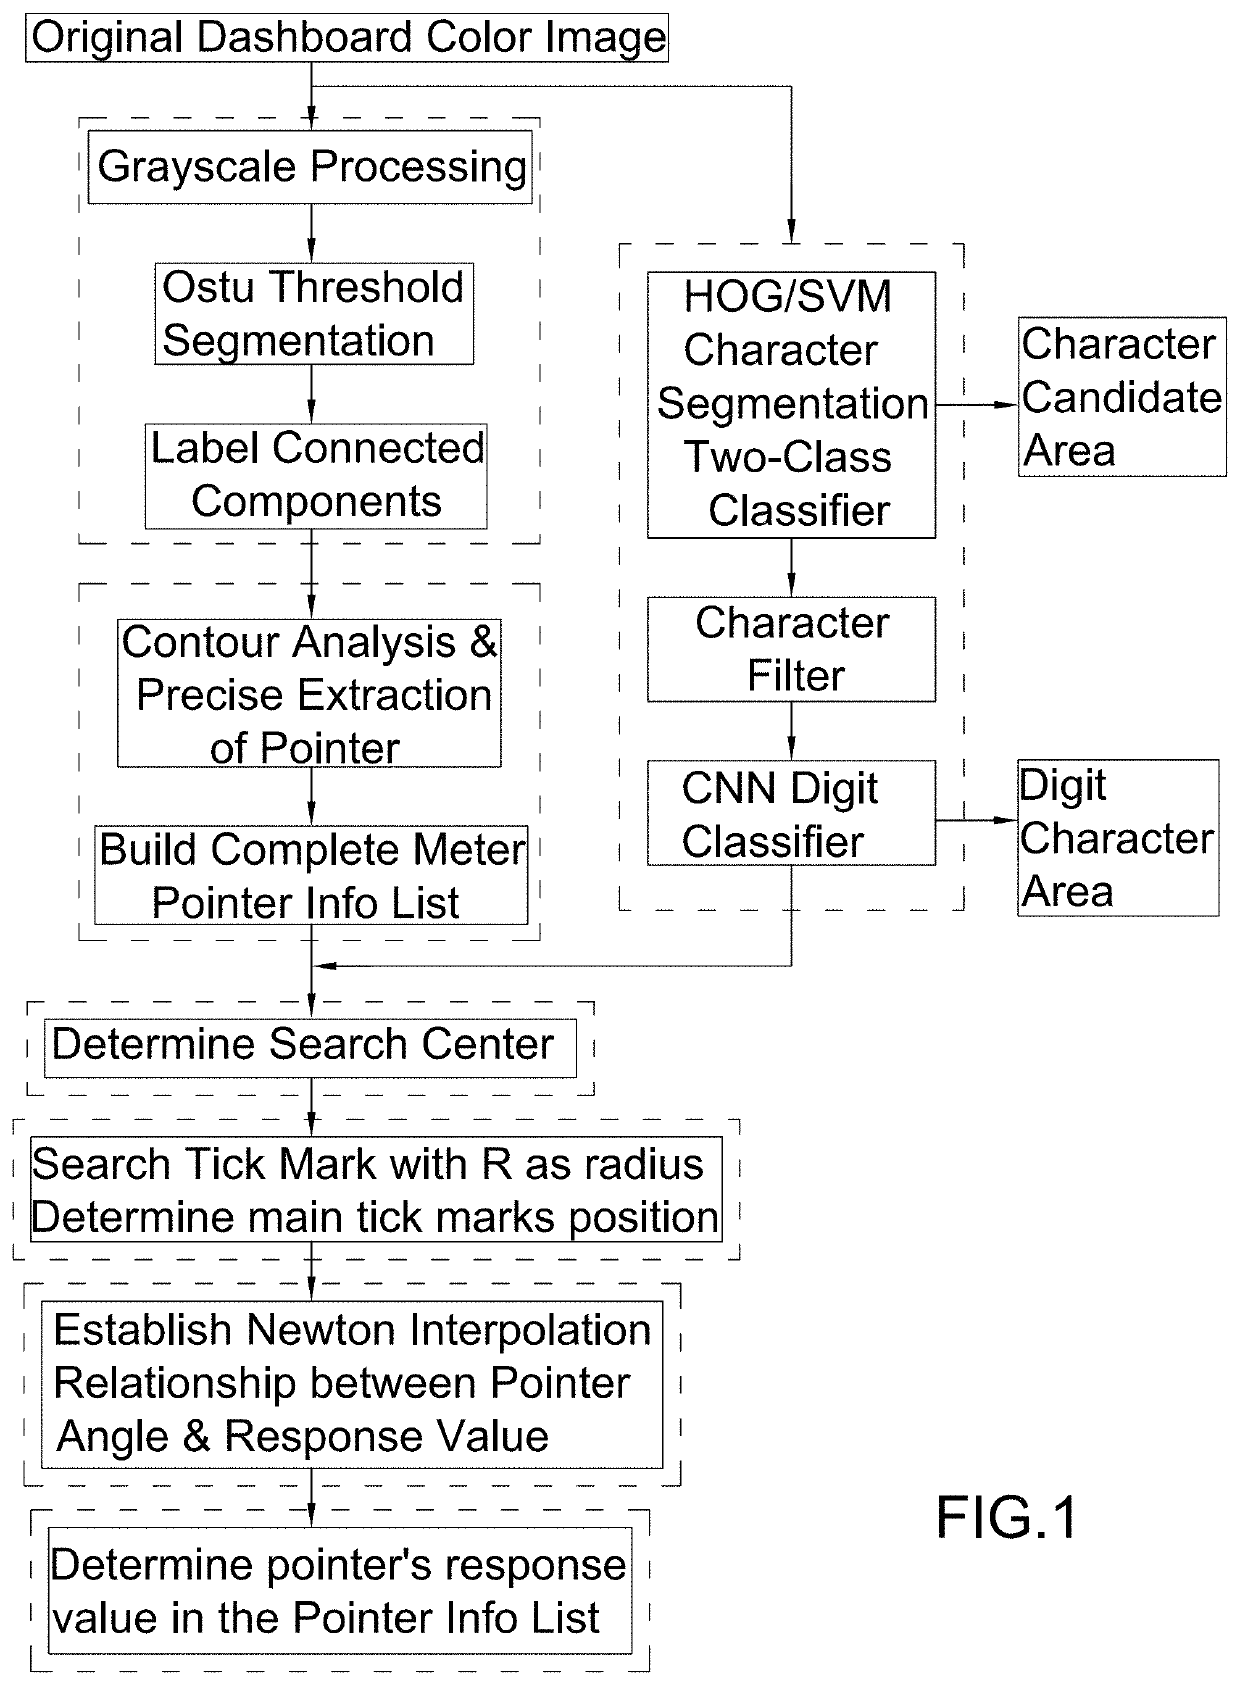 Adaptive auto meter detection method based on character segmentation and cascade classifier